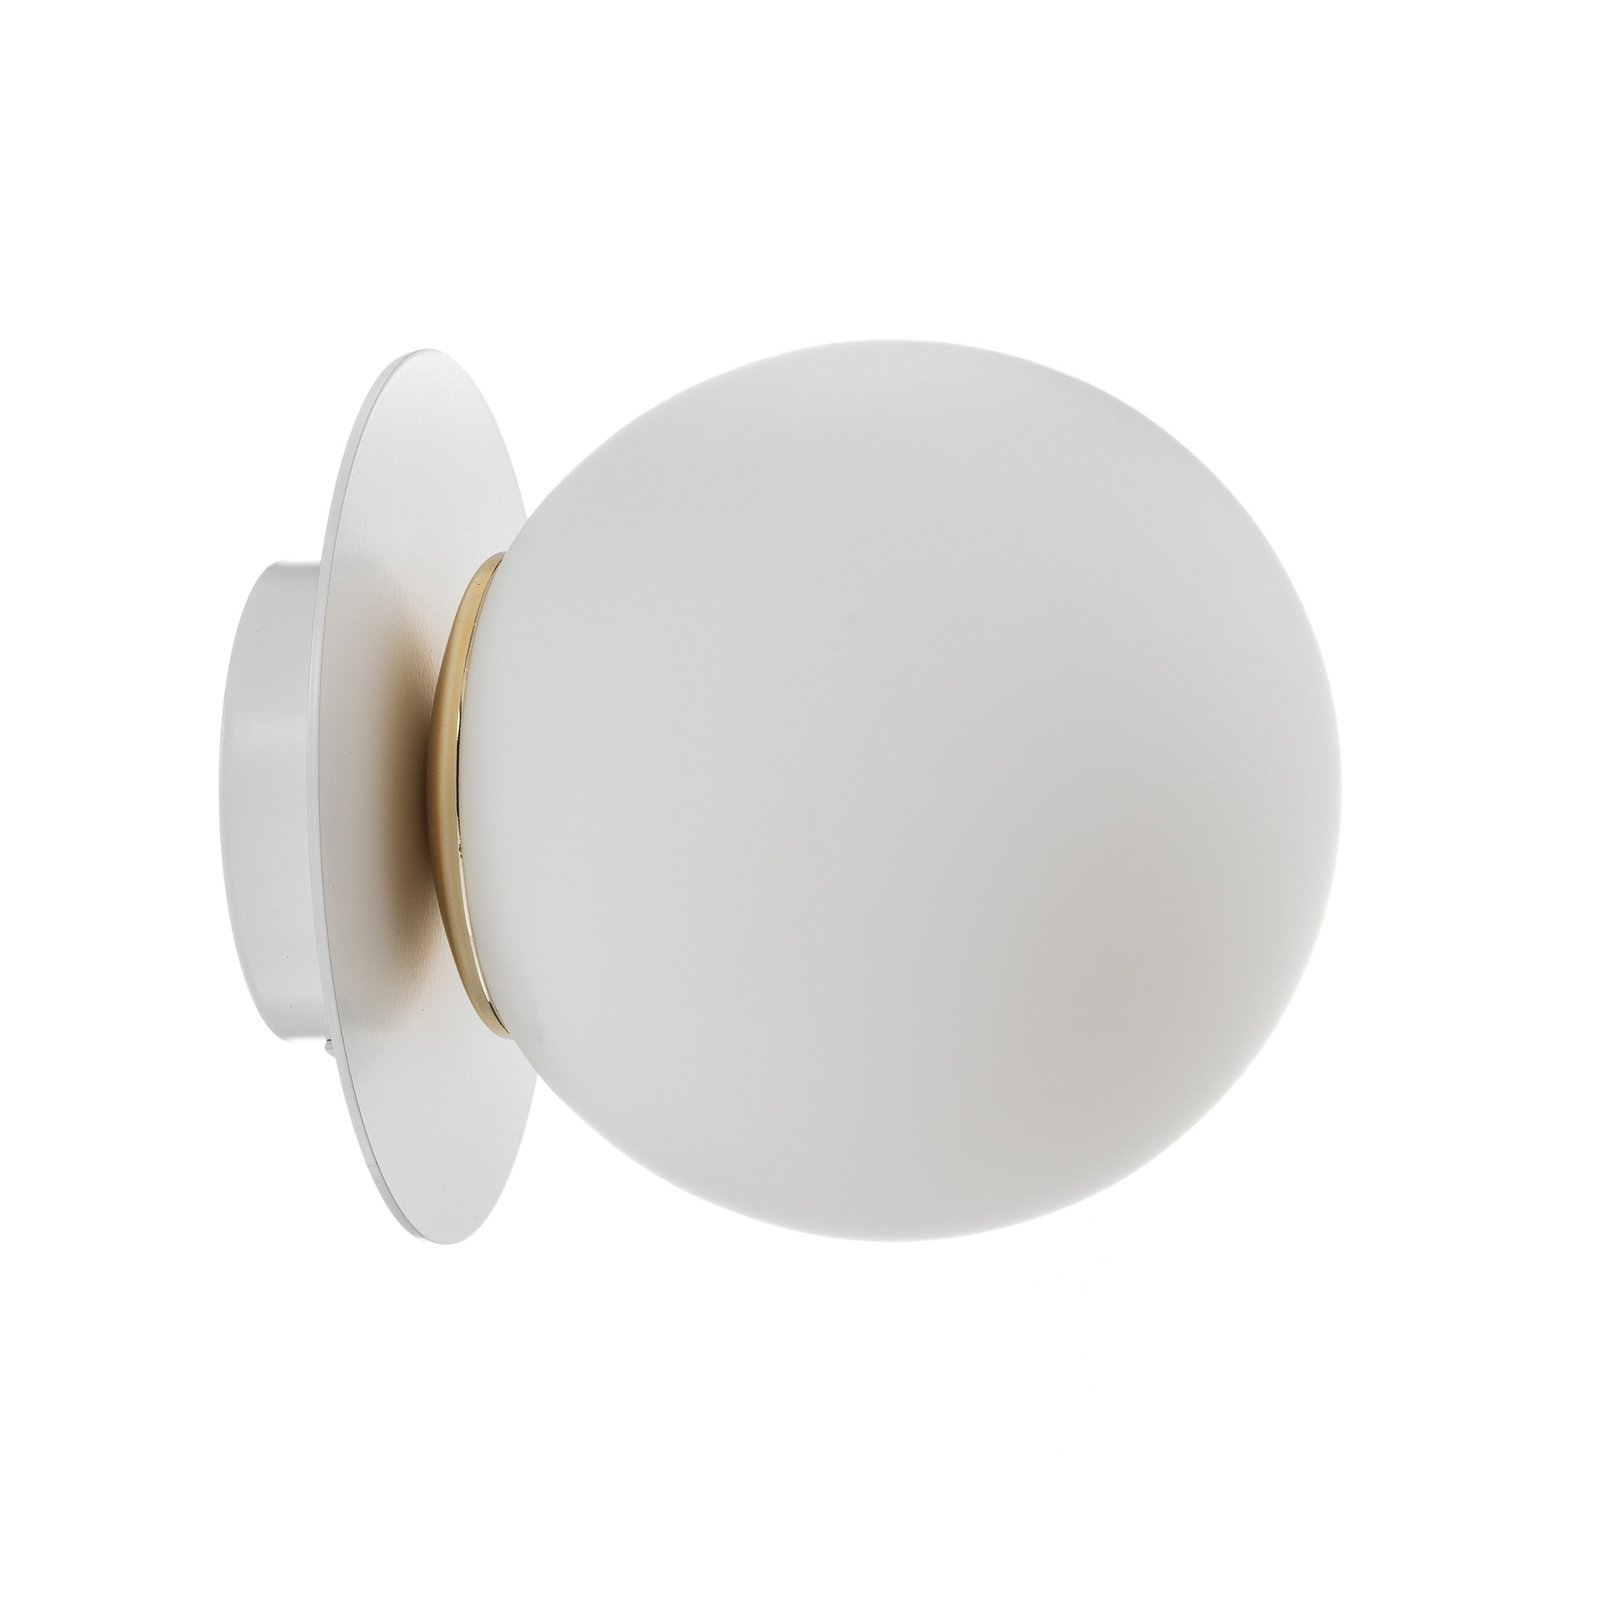 Minerva K1 wall light with white metal trim